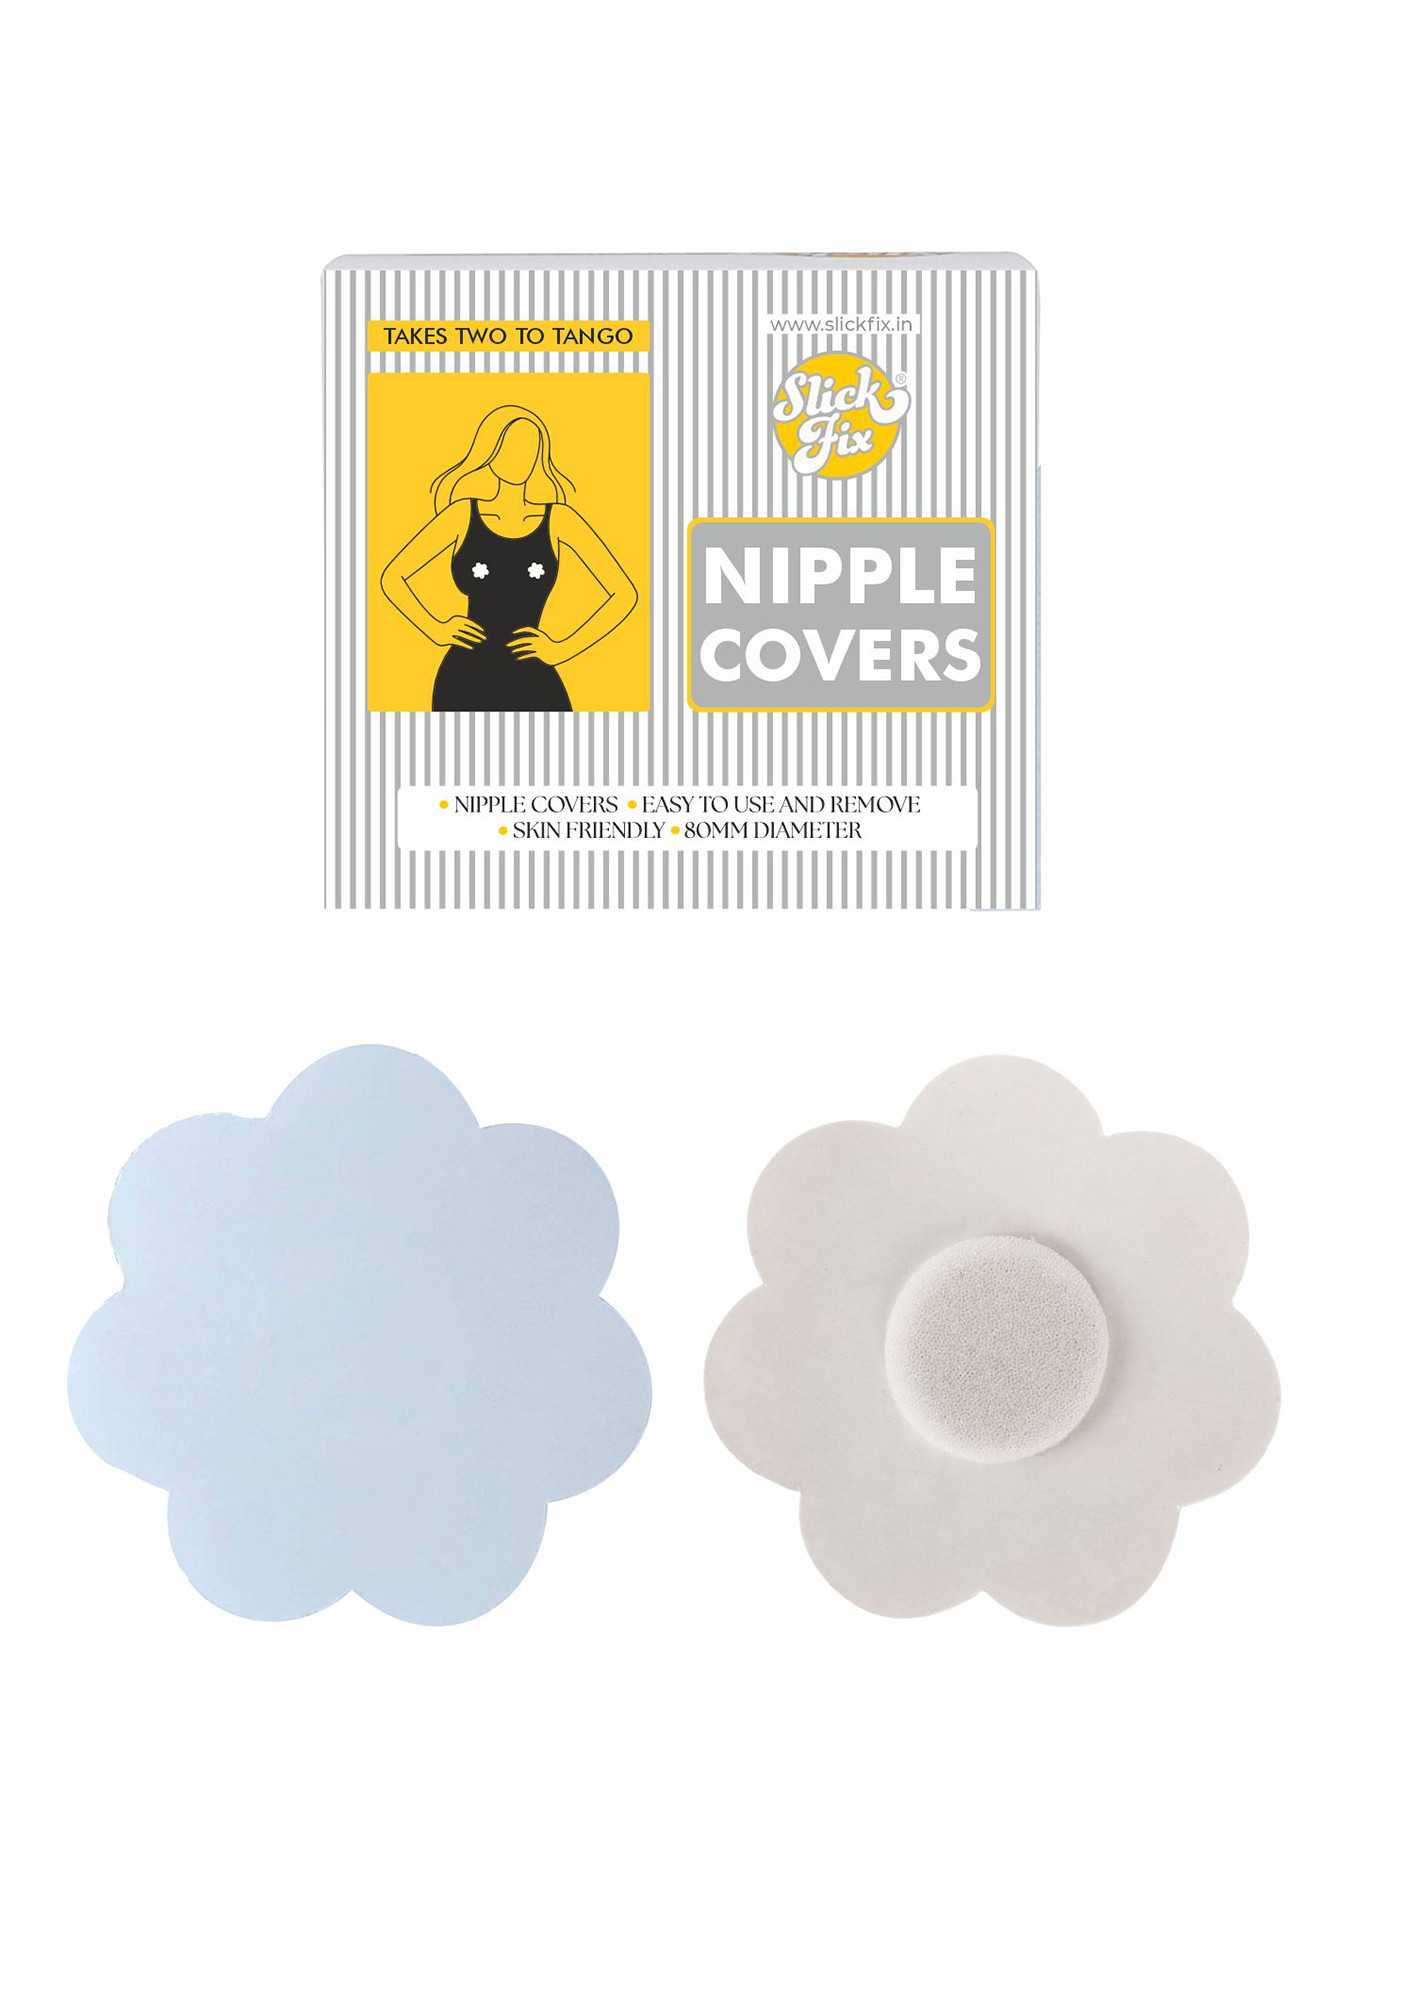 SLICKFIX Self Adhesive Nipple Covers Transparent Colour Pack of 100 Nipple Pasties, Nipple Protectors, Bra-Free Clothing, Disposable, Nipple Stickers, Breast Covers